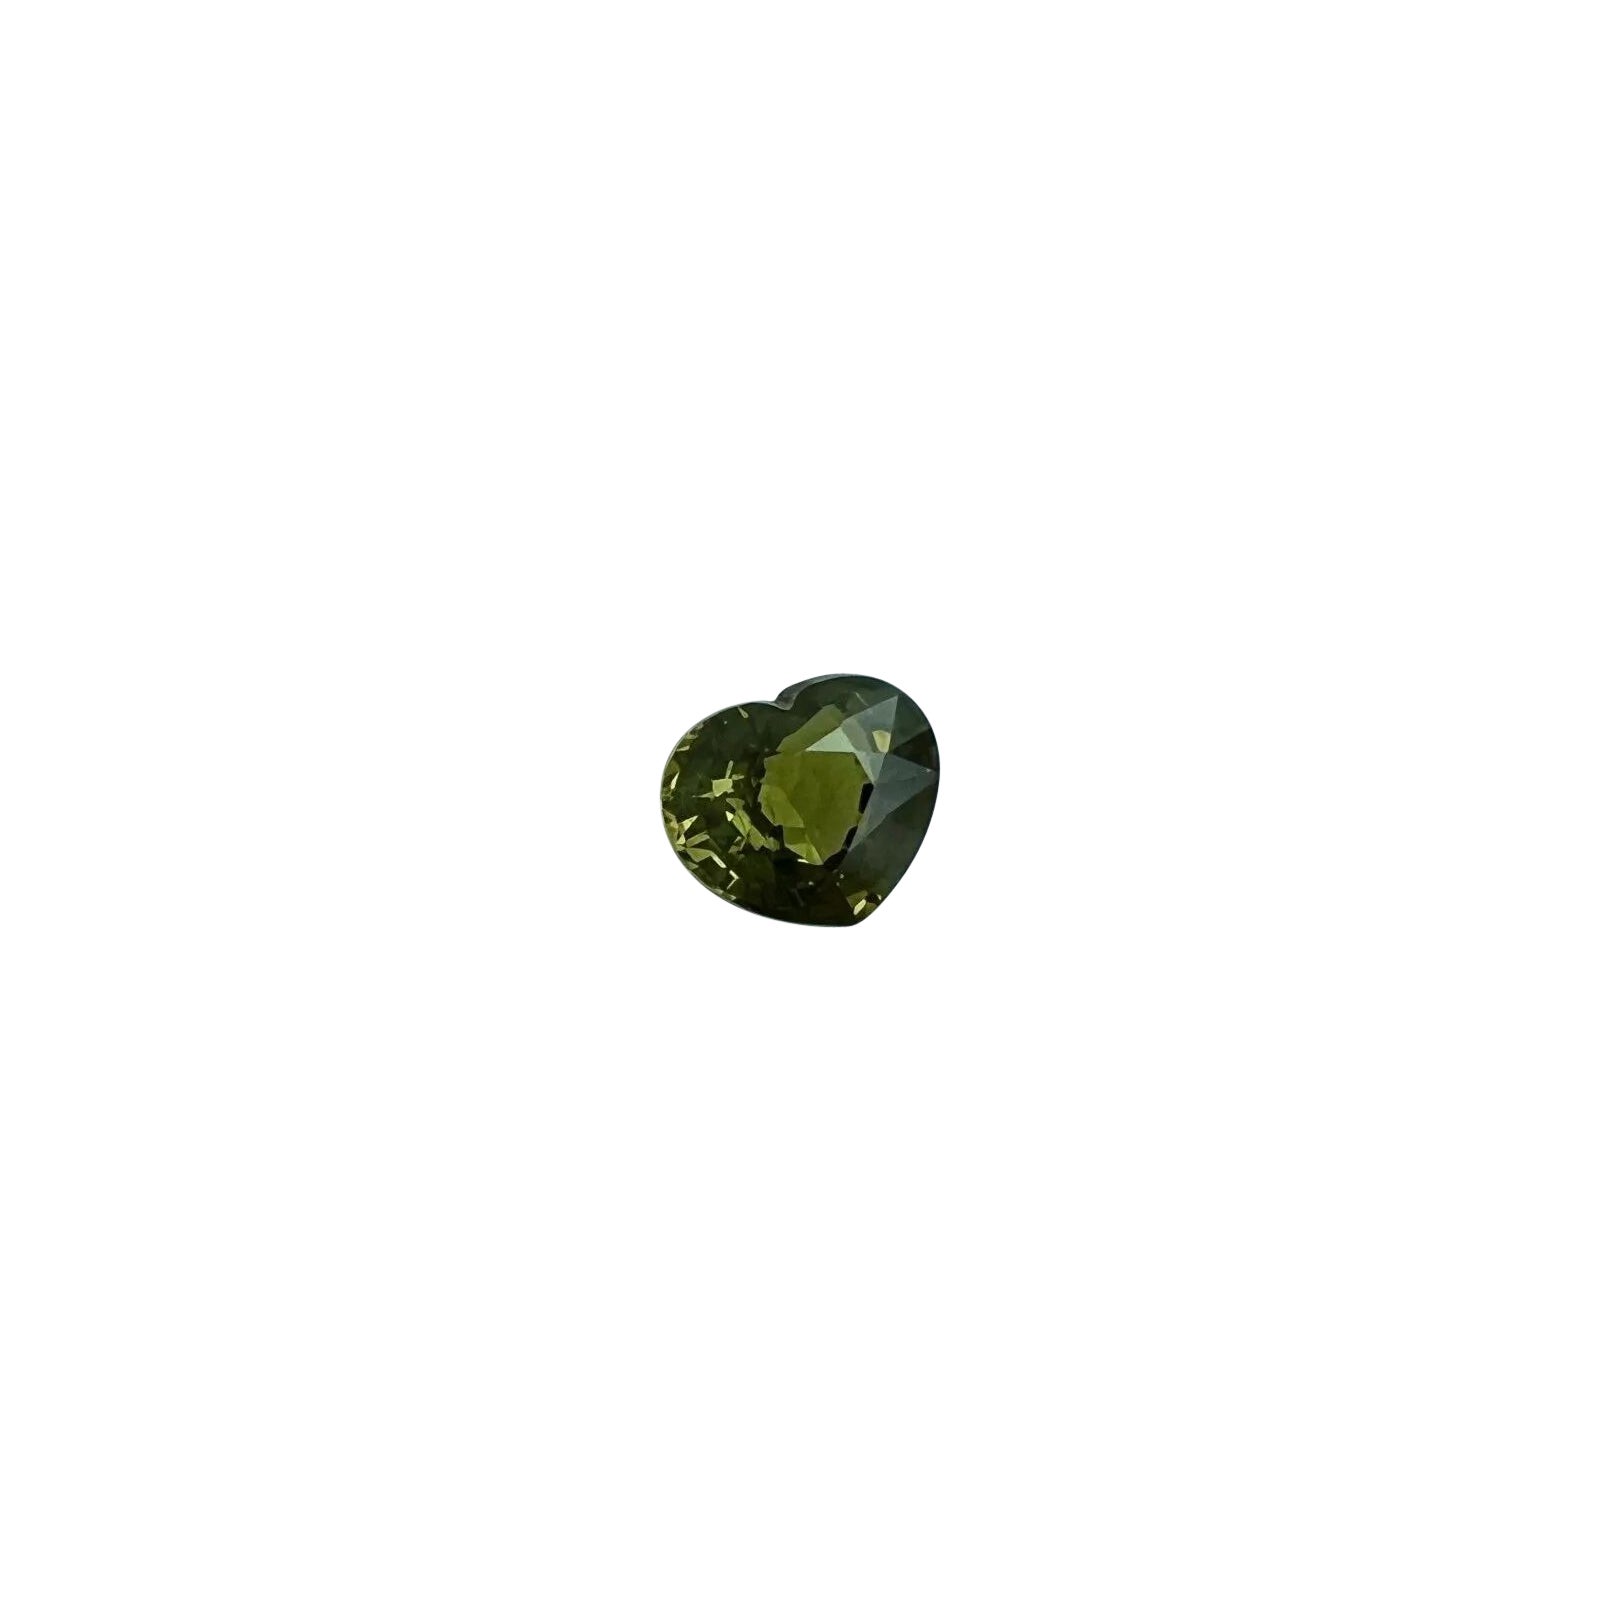 1.13ct Unique Olive Green Yellow Untreated Heart Cut Sapphire Gem IGI Blister For Sale